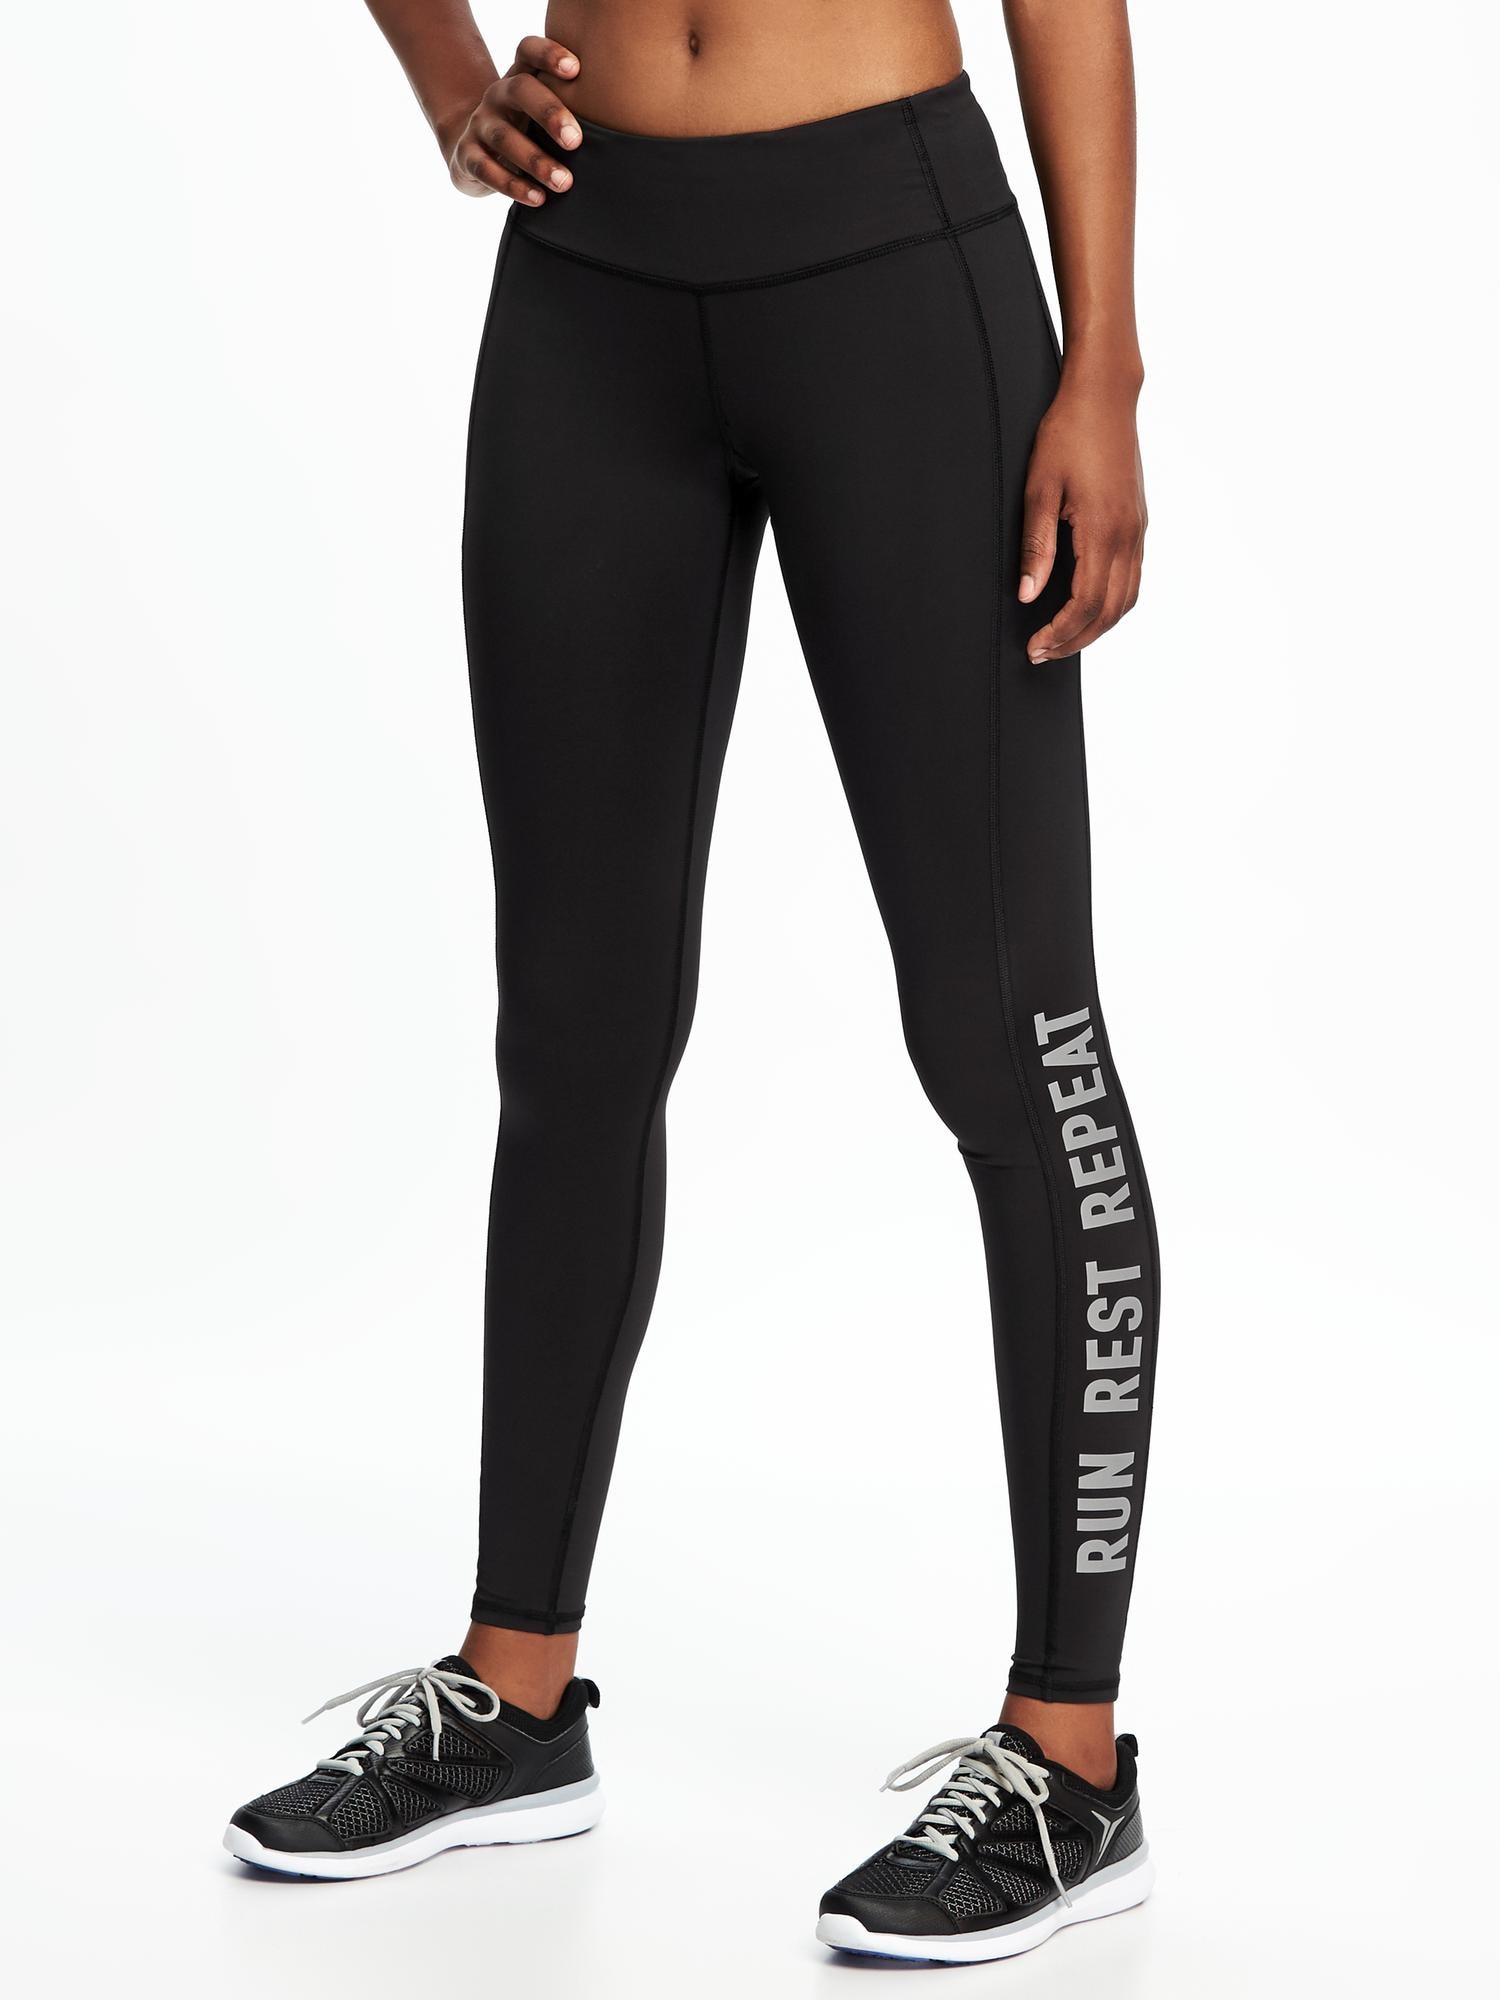 Mid-Rise Fitted Run Tights for Women